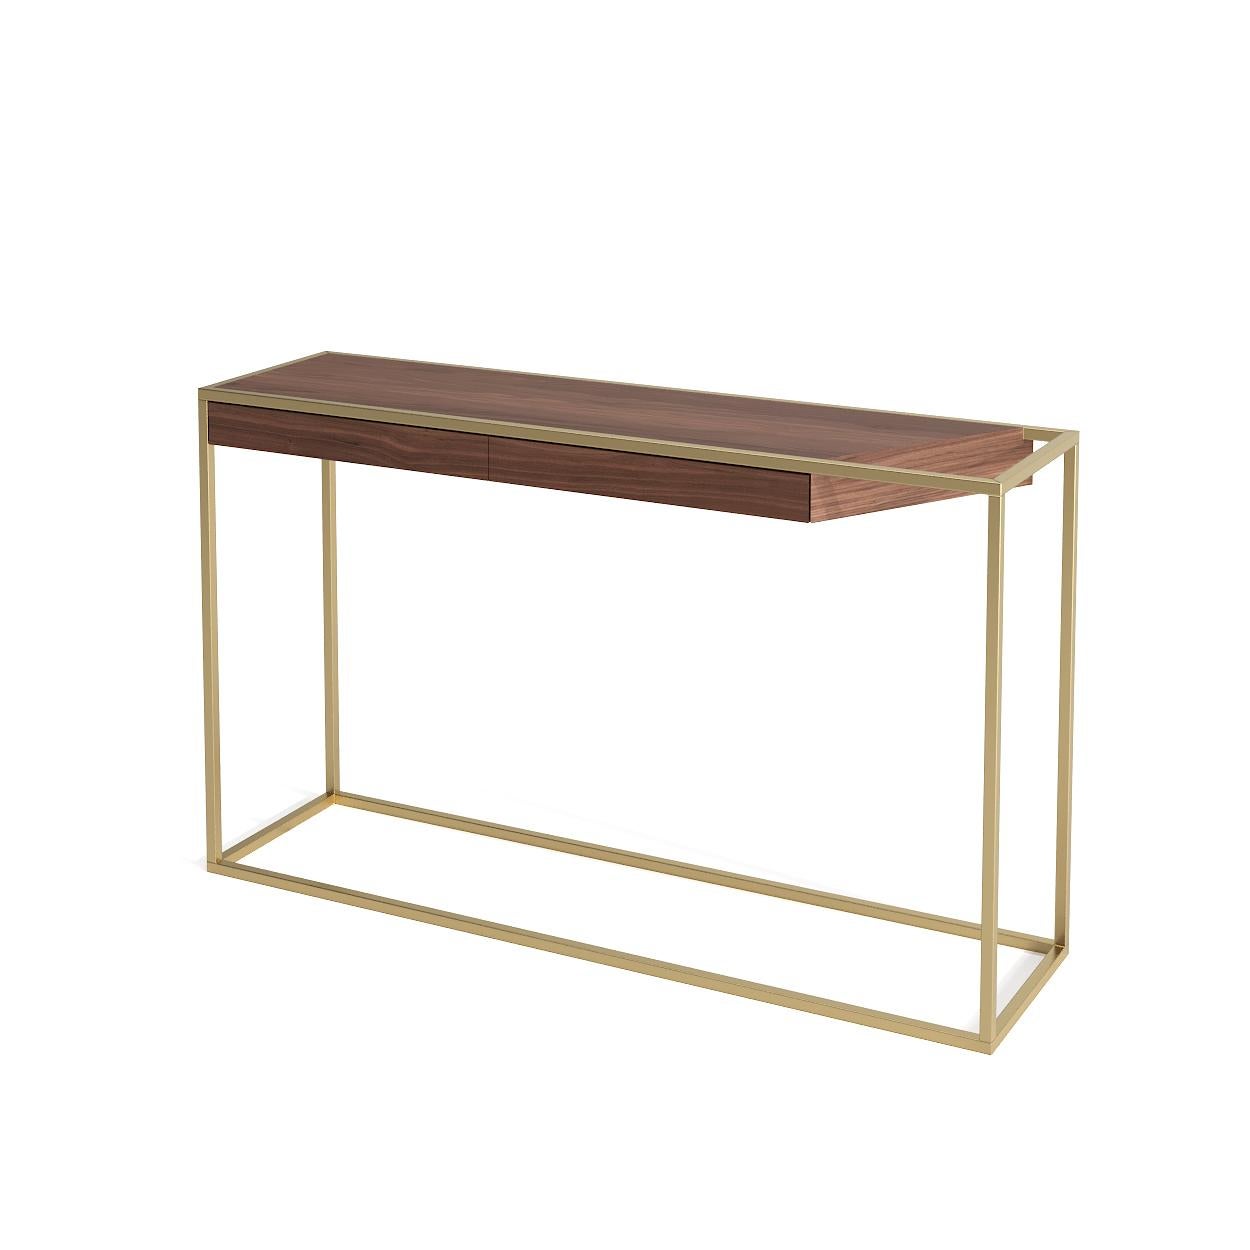 Modern Minimalist Rectangular Console Table Oak Wood and Brushed Stainless Steel For Sale 5